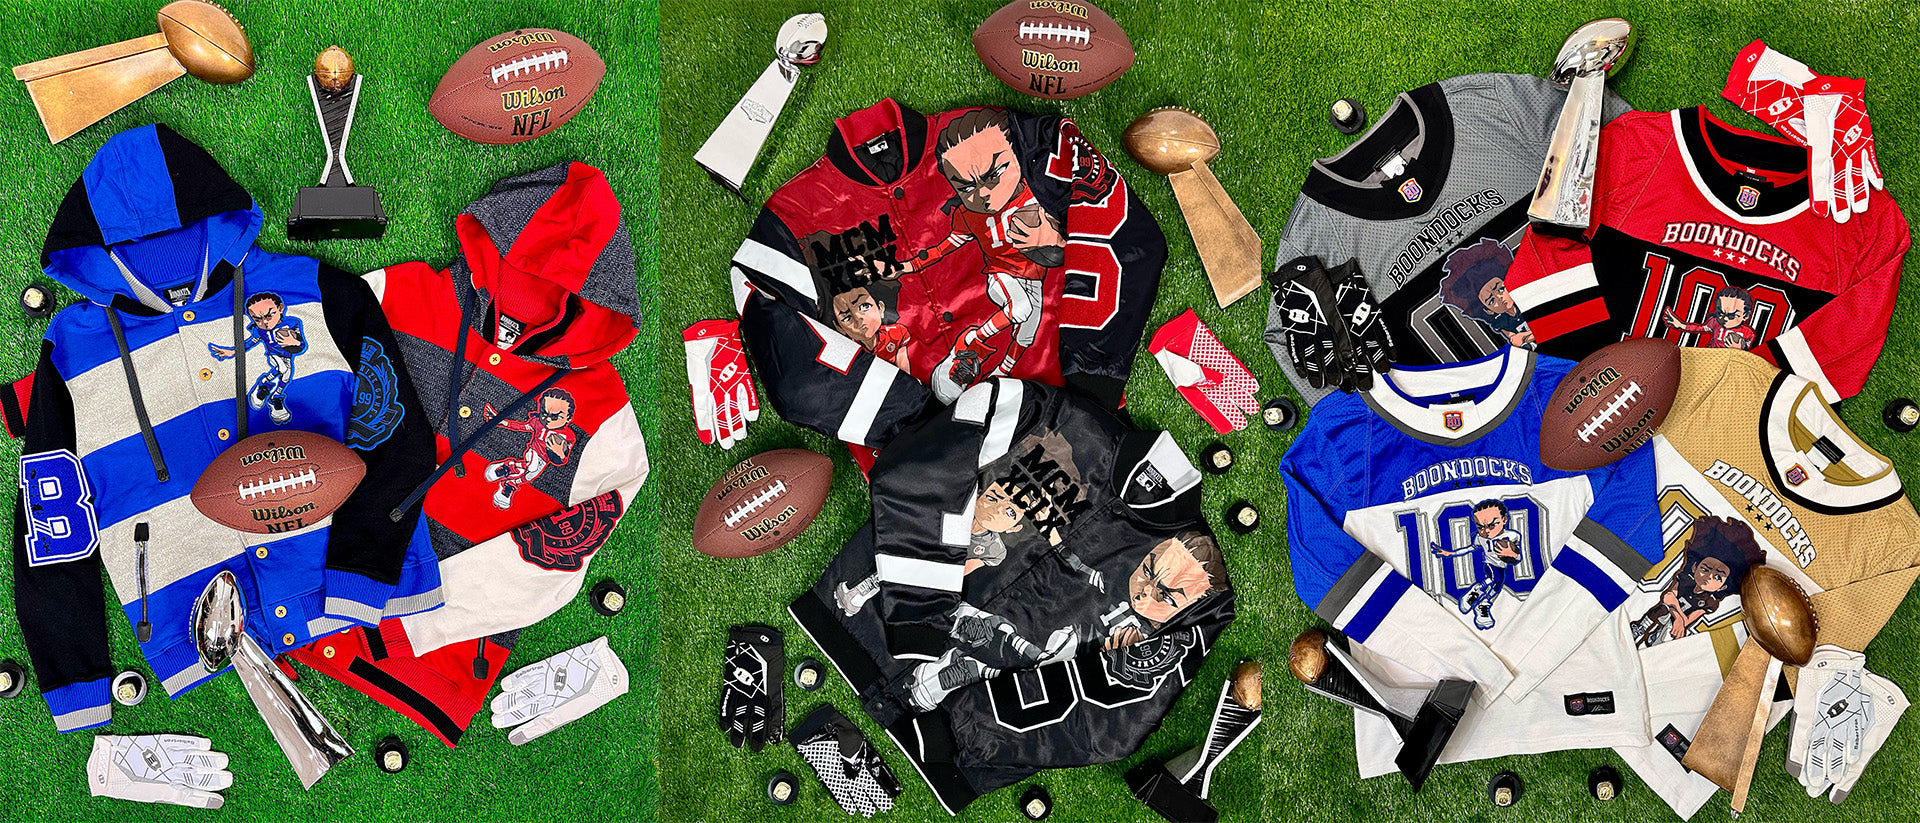 The Boondocks Football Collection